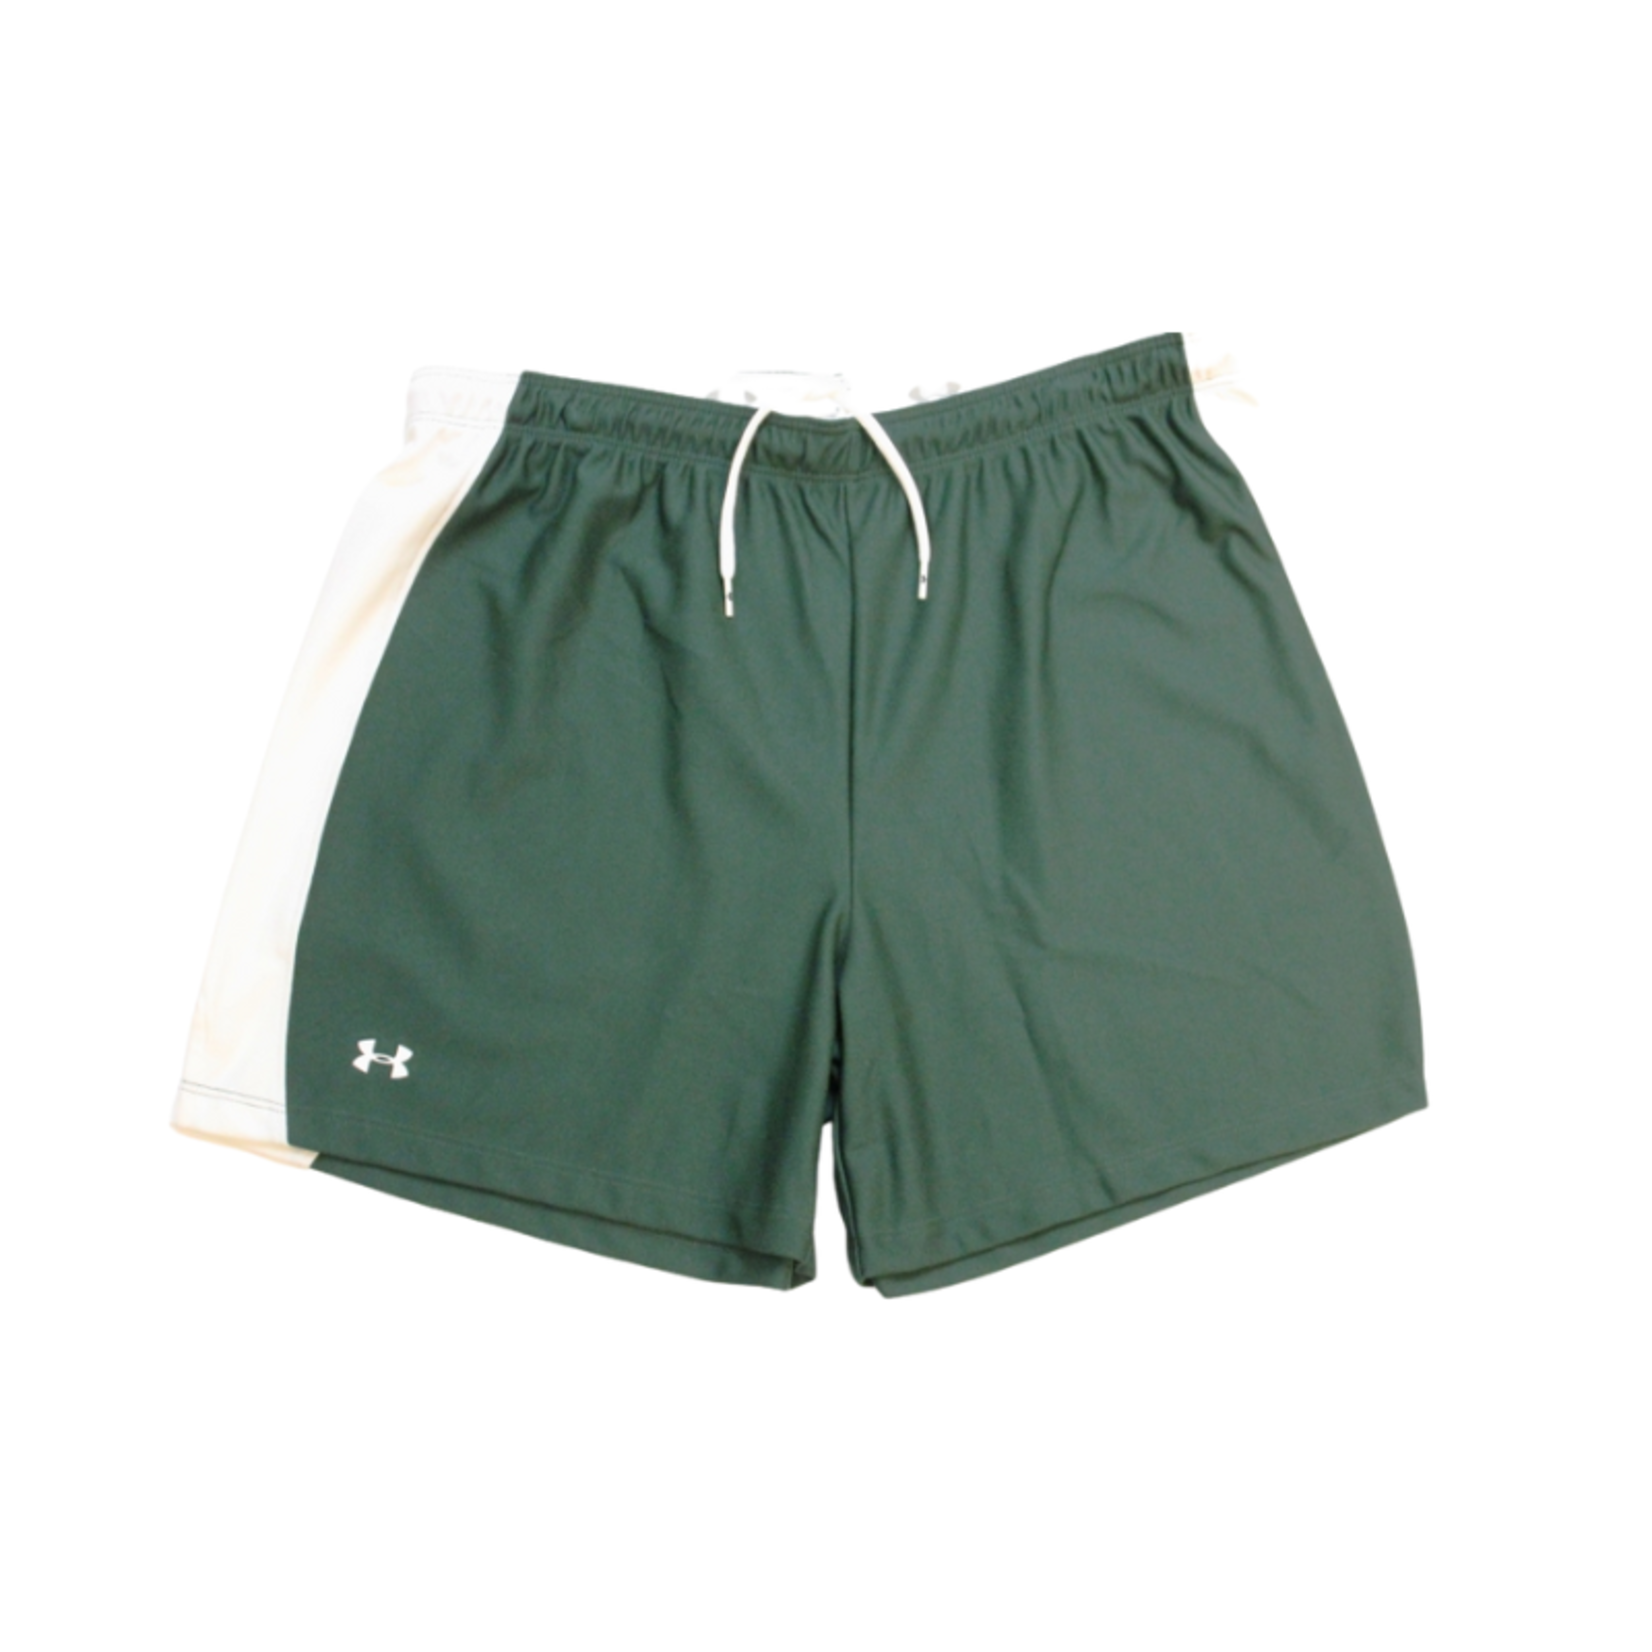 Under Armour Women's Green & White Under Armour Shorts